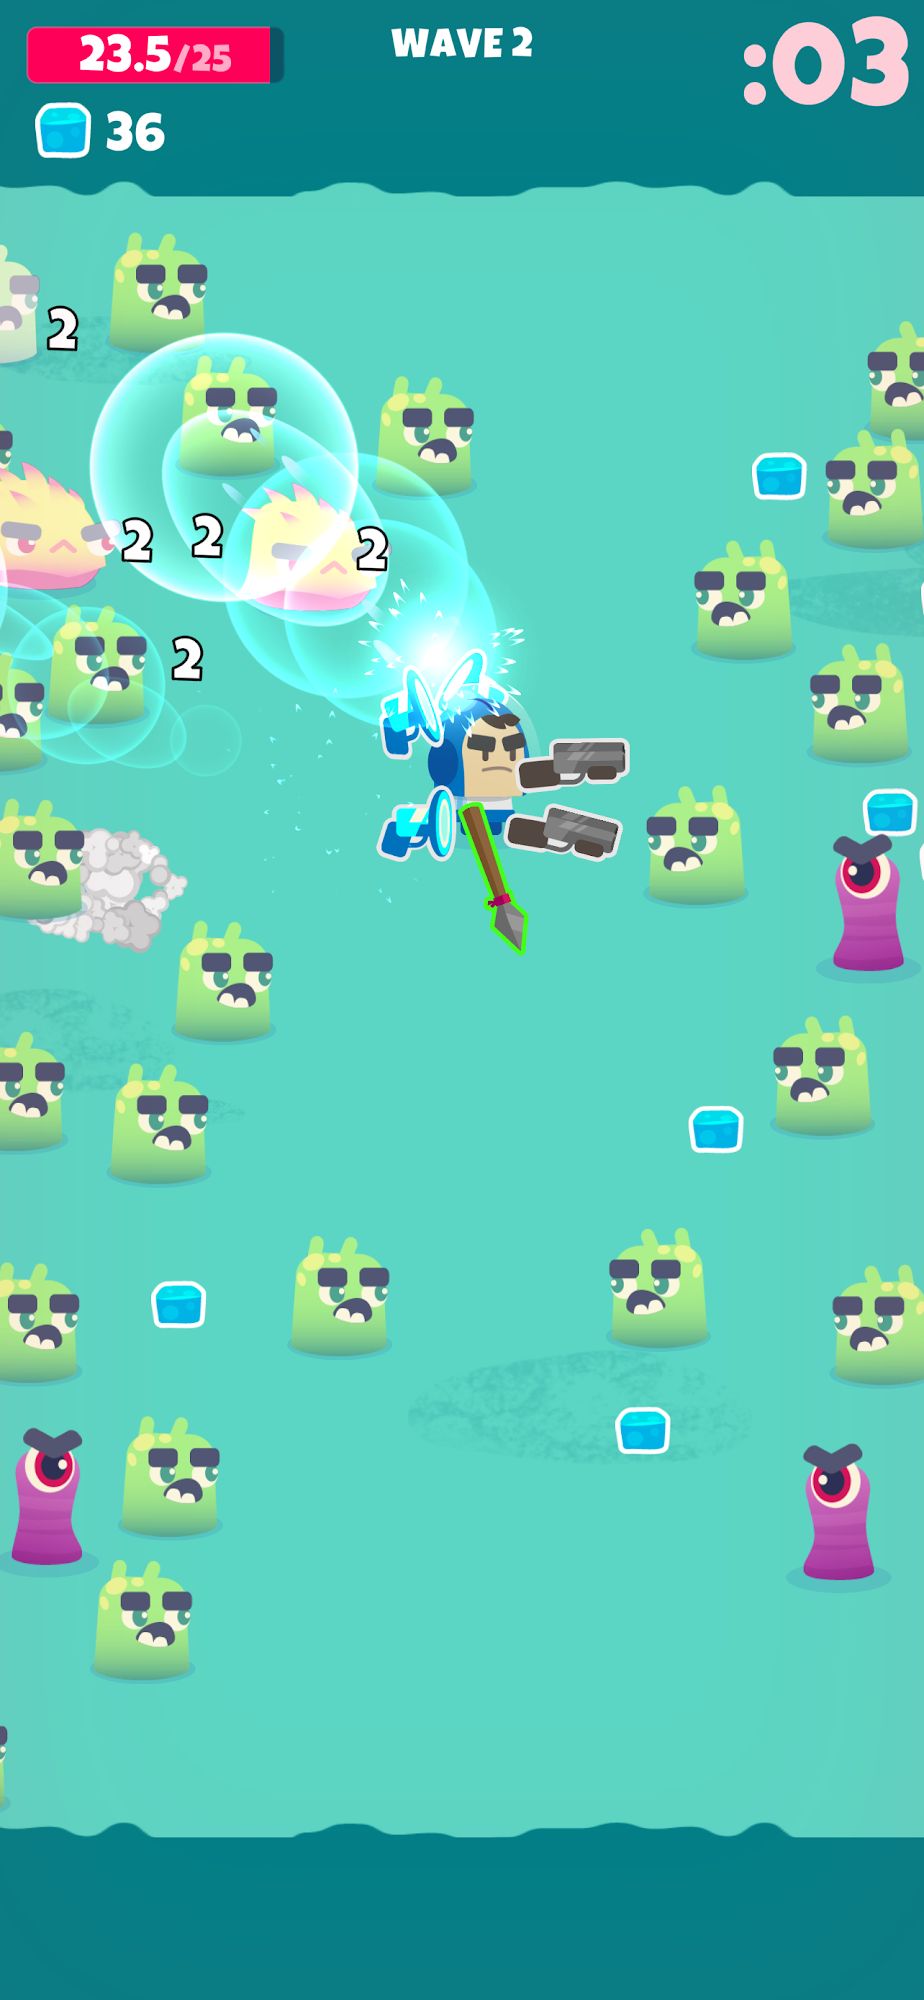 Gameplay of the Blastronauts for Android phone or tablet.